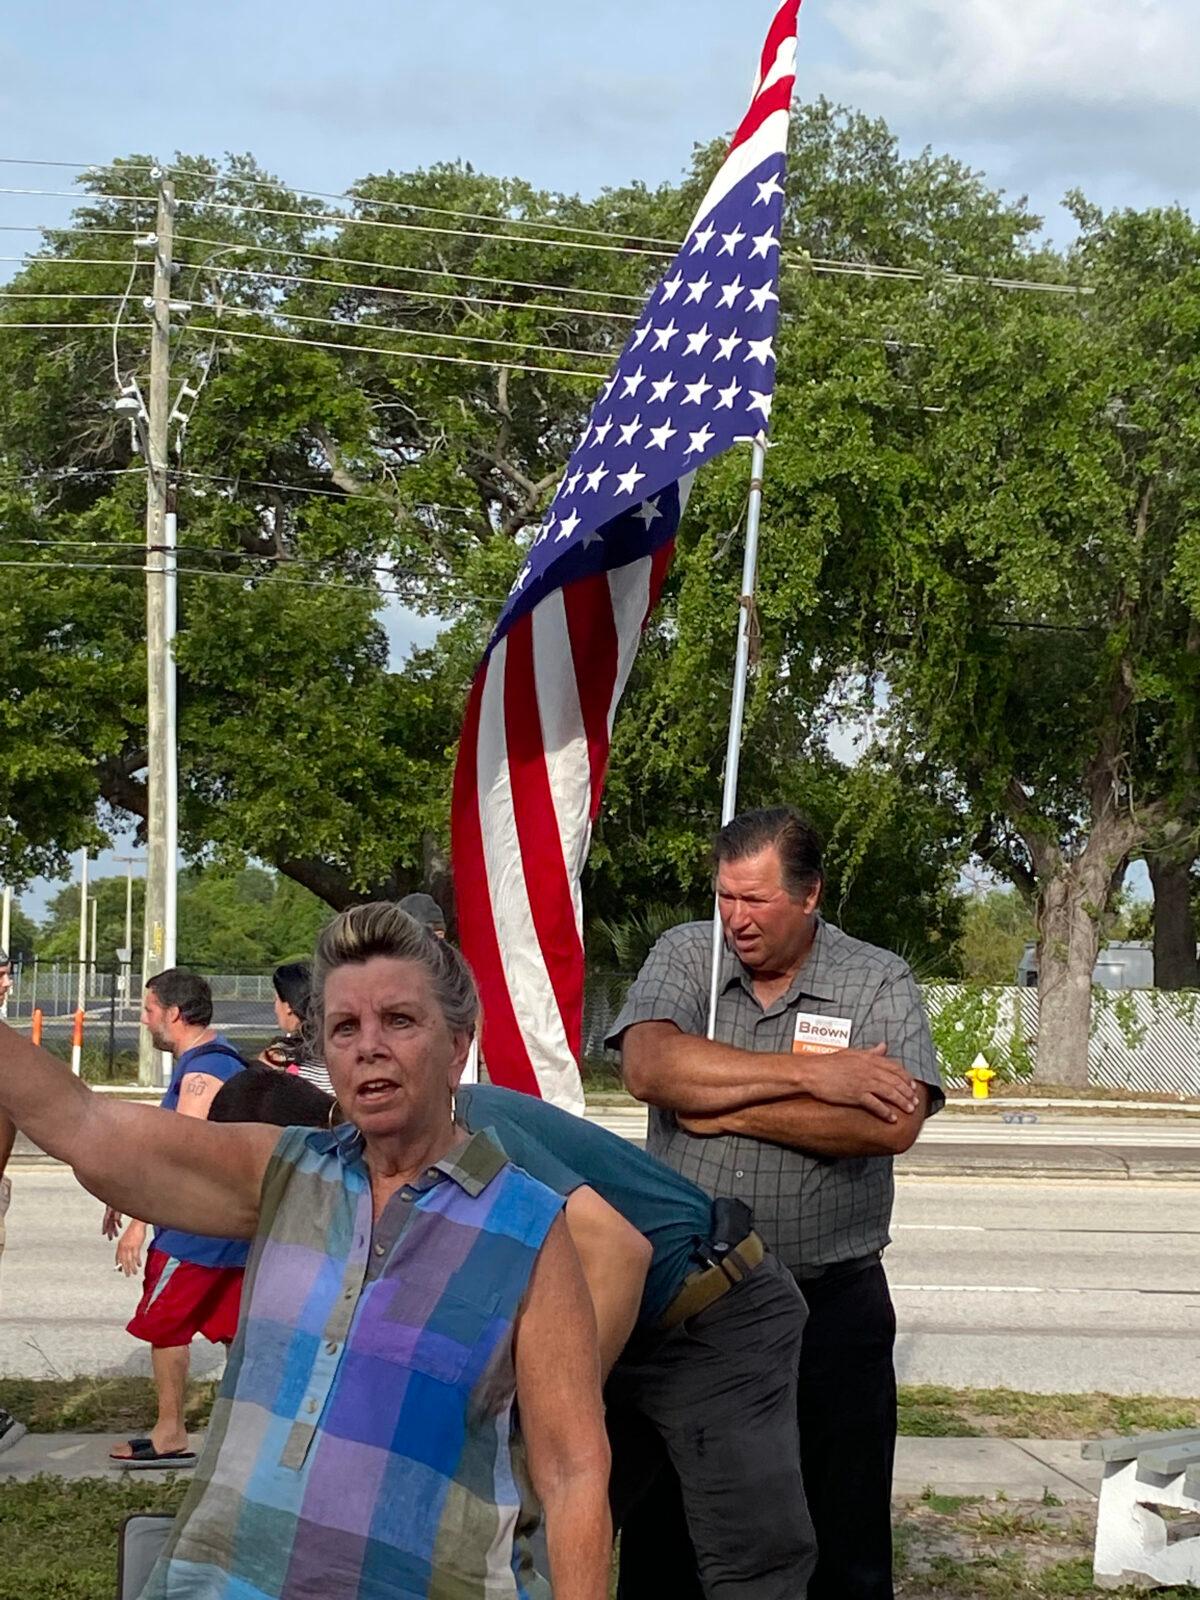 An attendee holds an American flag in the upside down position, signaling distress and extreme danger, at a prayer vigil and rally in support of Jeremy Brown, a Jan. 6 prisoner and candidate for Florida House District 62, outside of Pinellas County Jail on May 22, 2022. (Patricia Tolson/The Epoch Times)